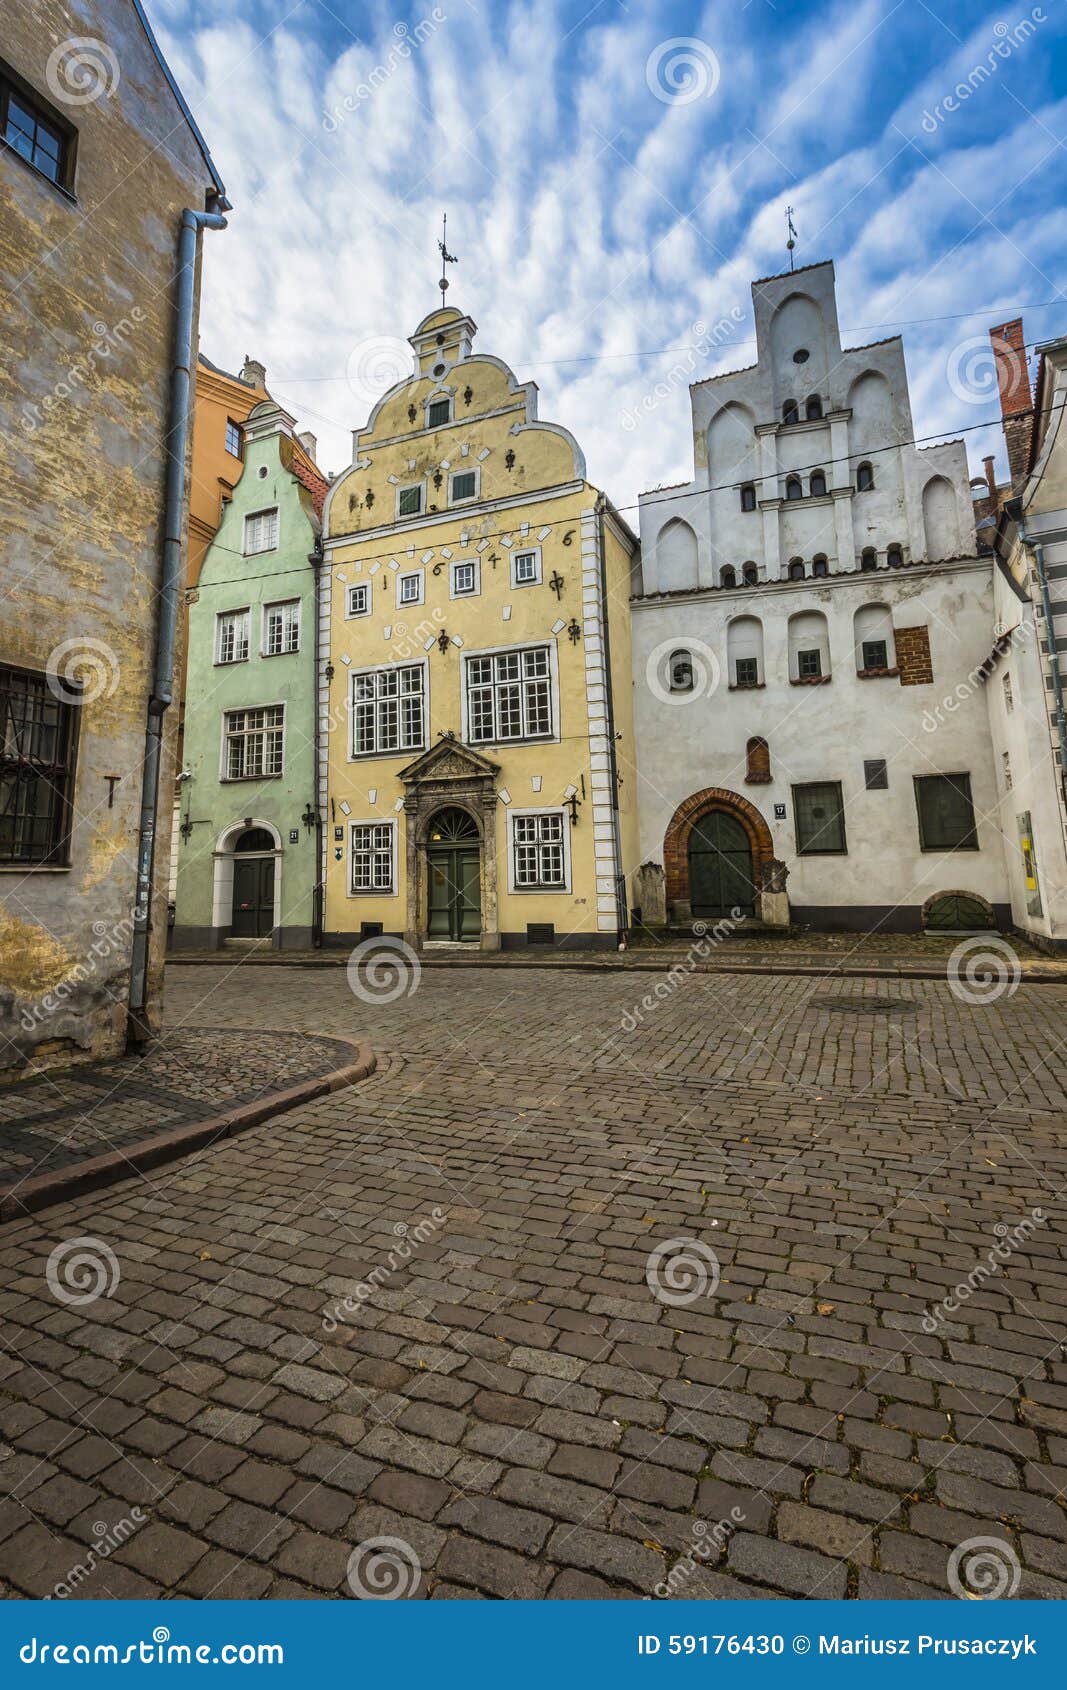 oldest buildings in riga latvia - the three brothers